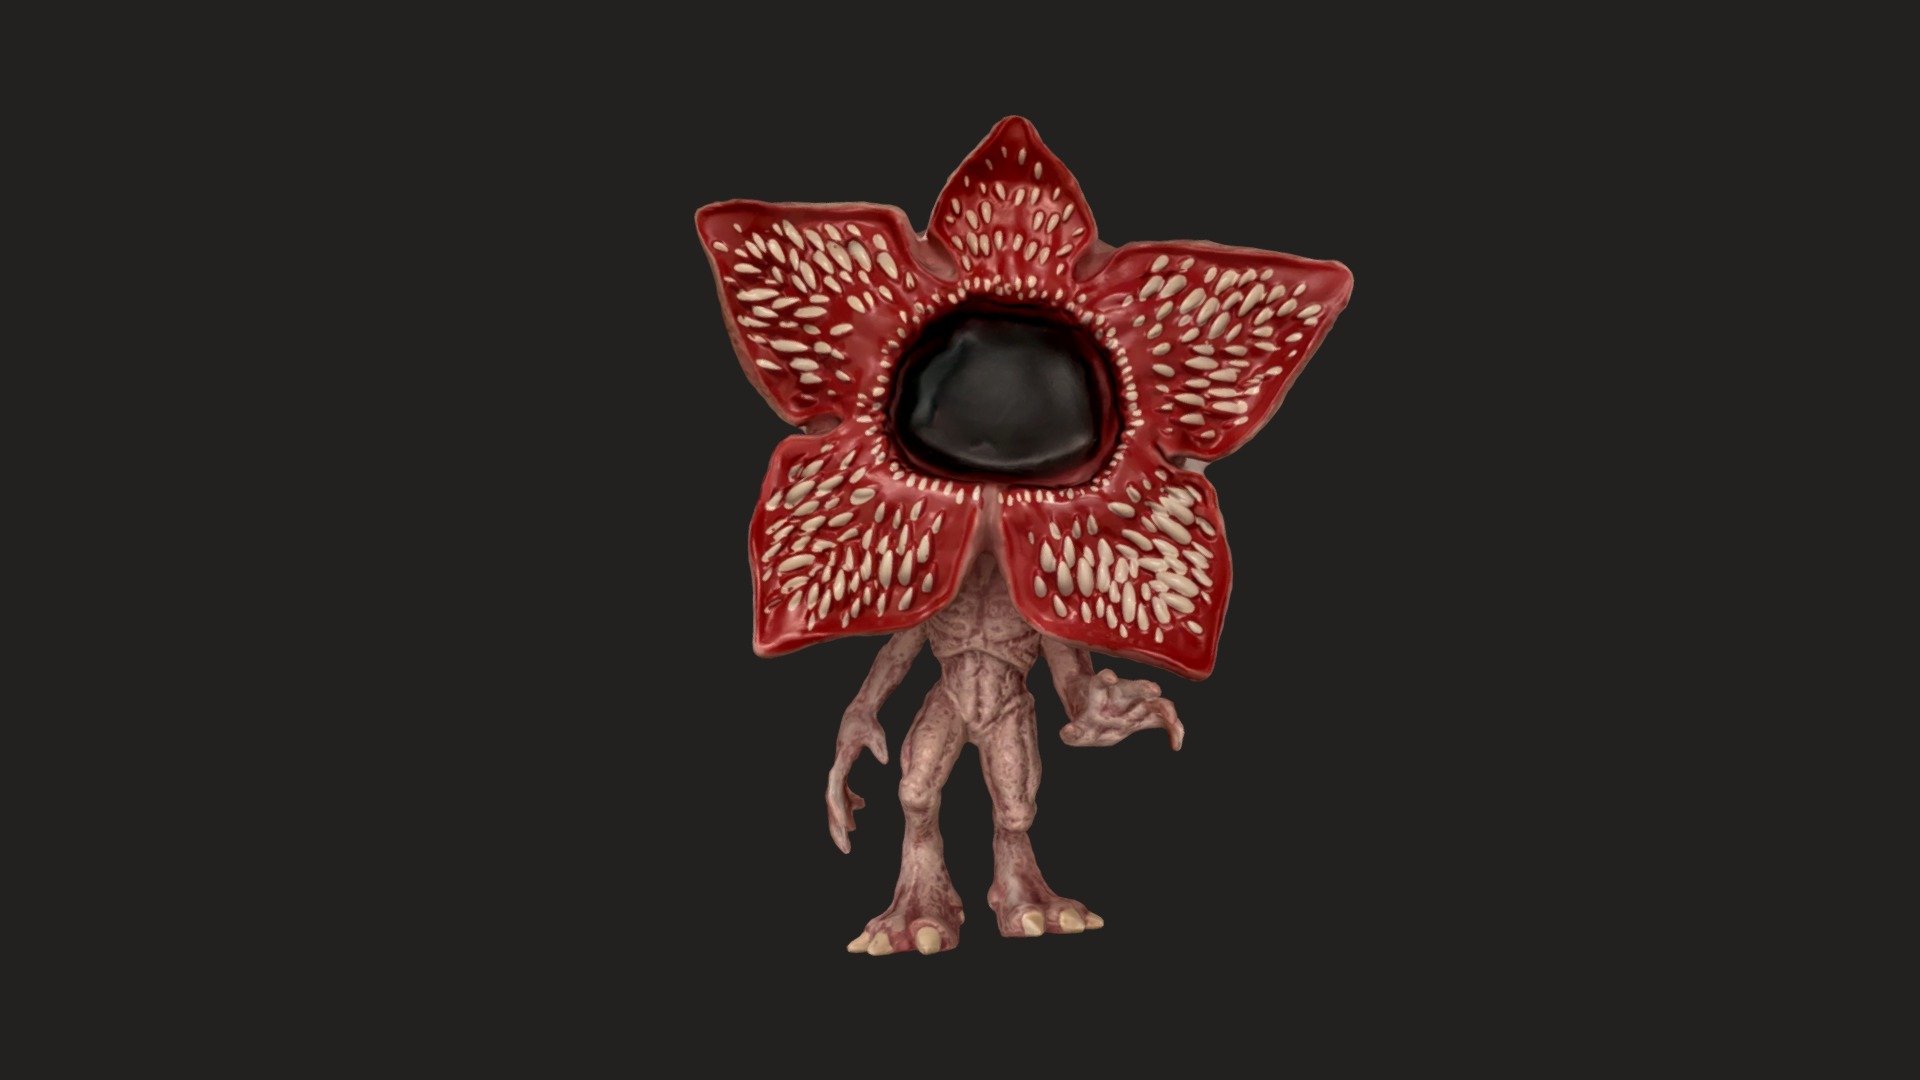 3D scan of a demogorgon figurine by Pop Toys. (110+ Images, Photo Mode)

Created with Polycam - Day 249: Demogorgon Figurine - Buy Royalty Free 3D model by uttamg911 3d model